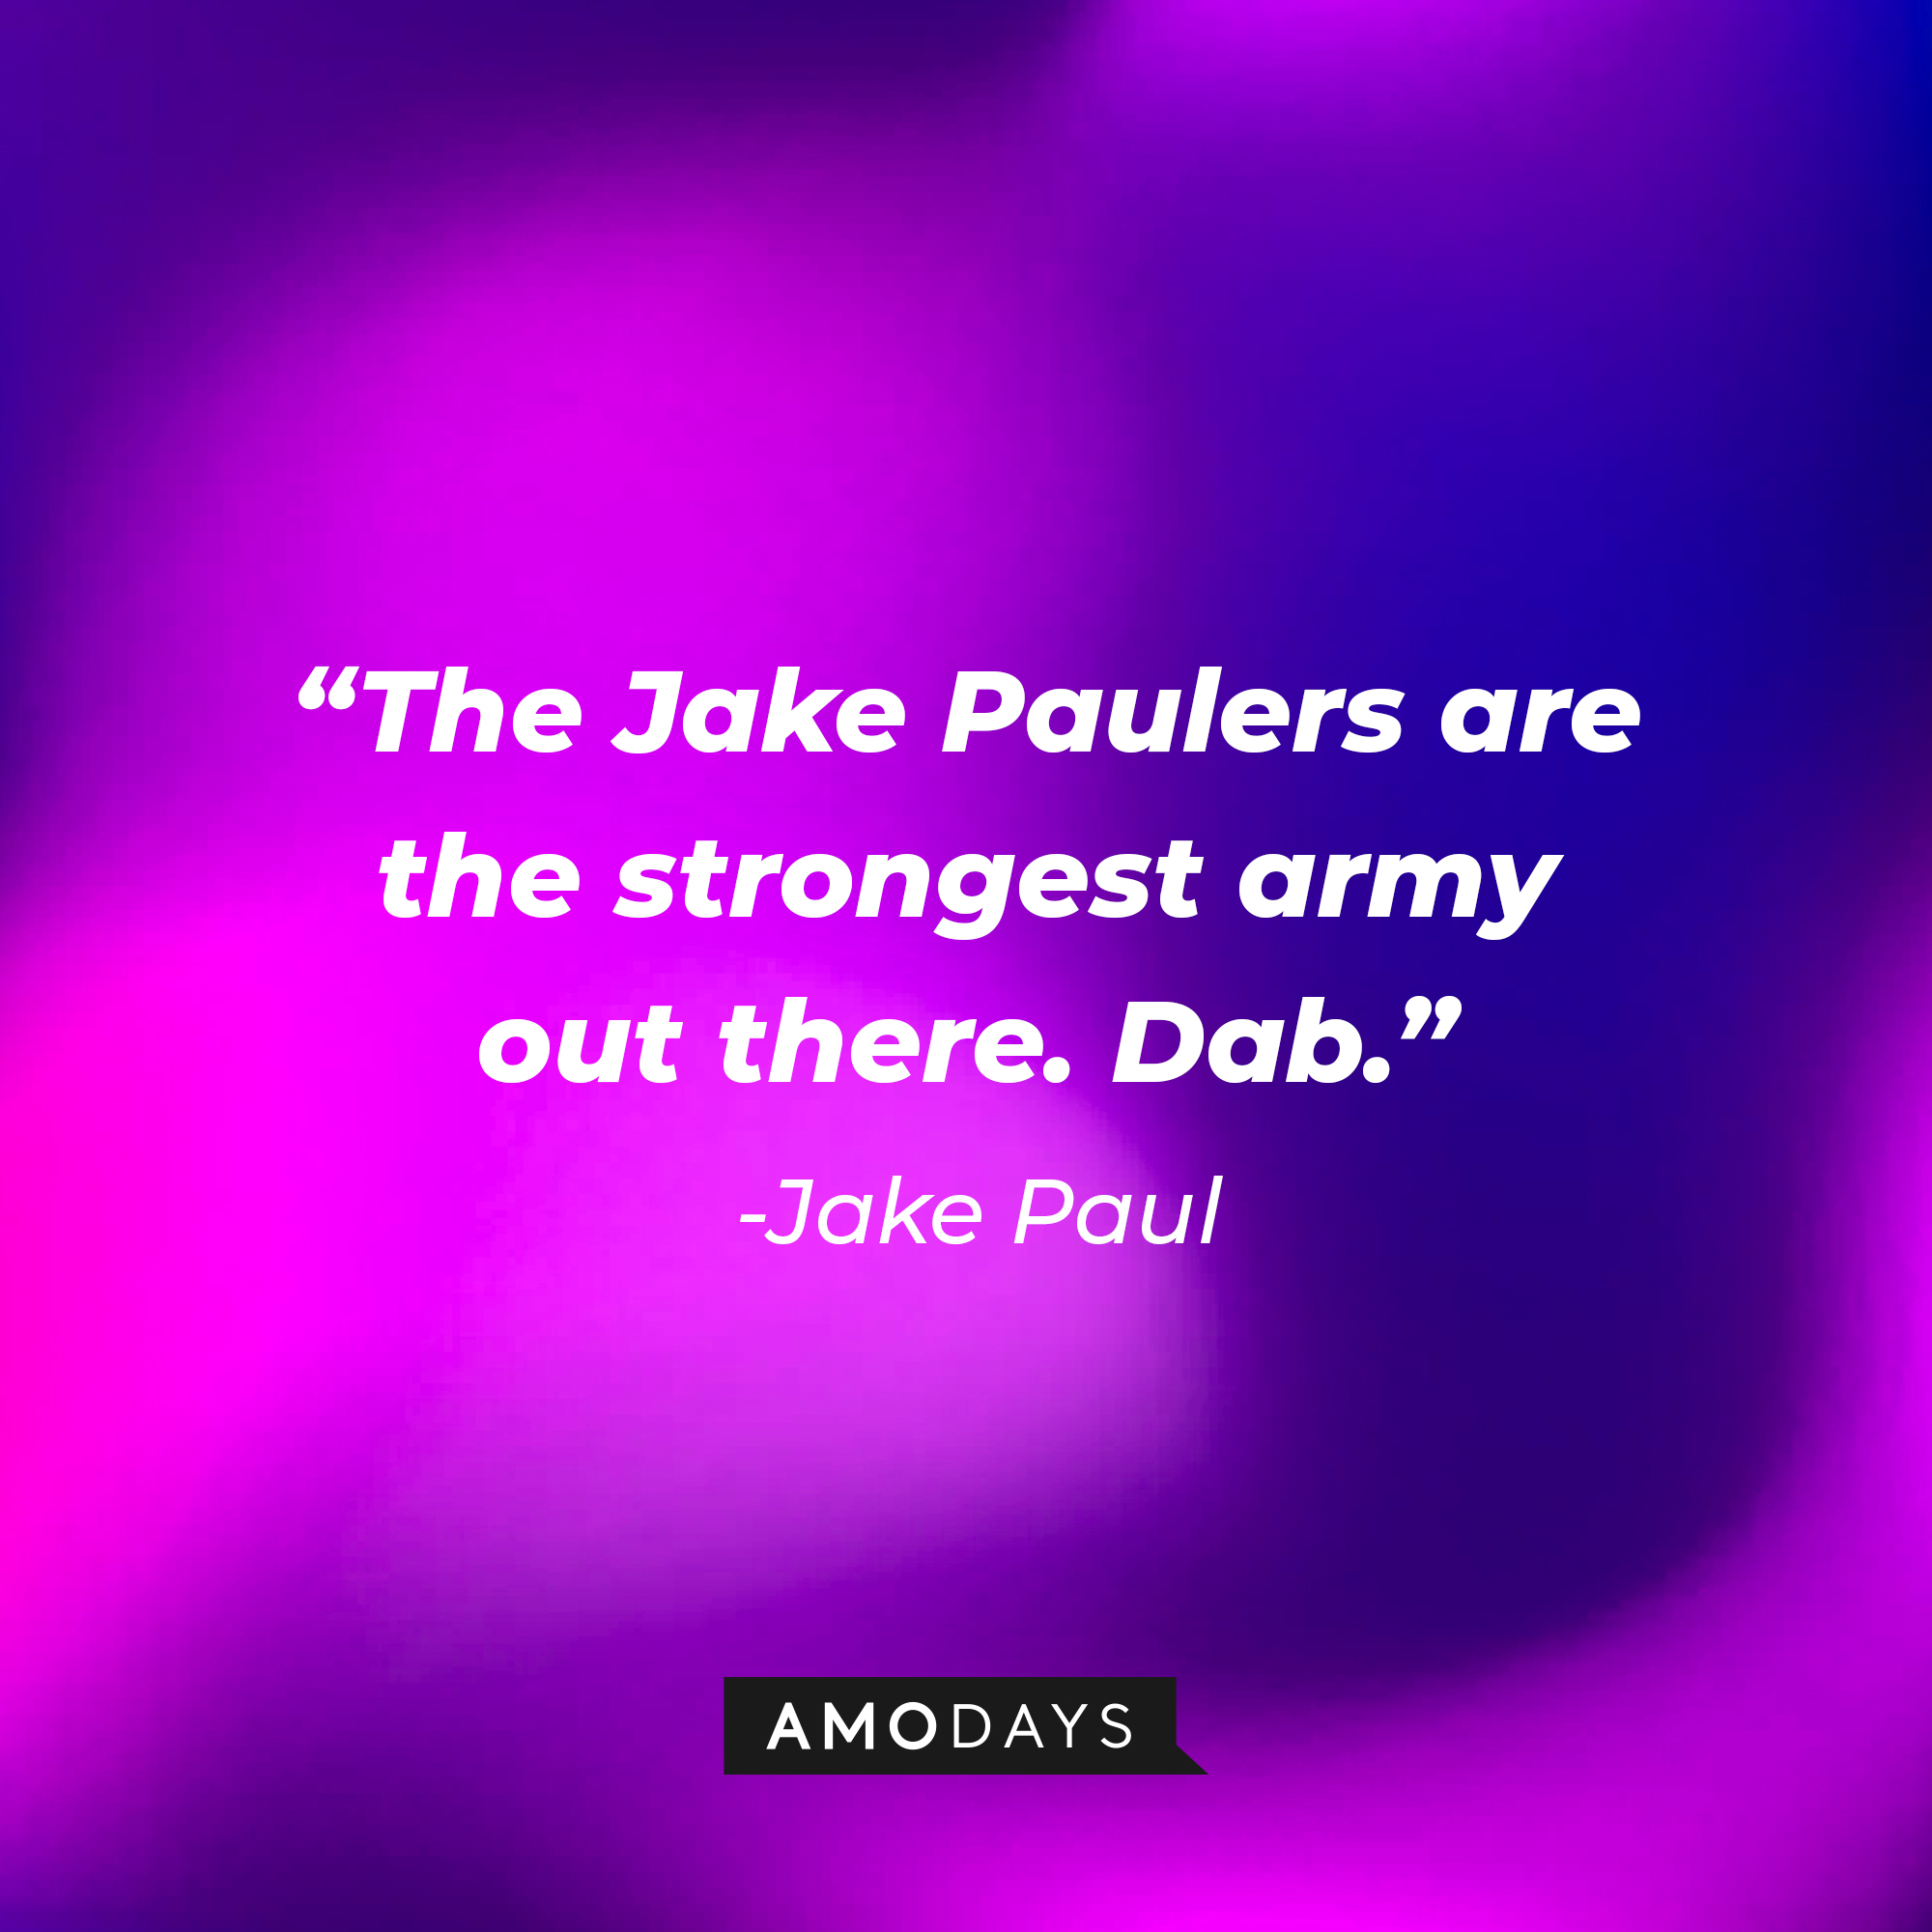 Jake Paul’s quote: "The Jake Paulers are the strongest army out there. Dab." | Image: Amodays